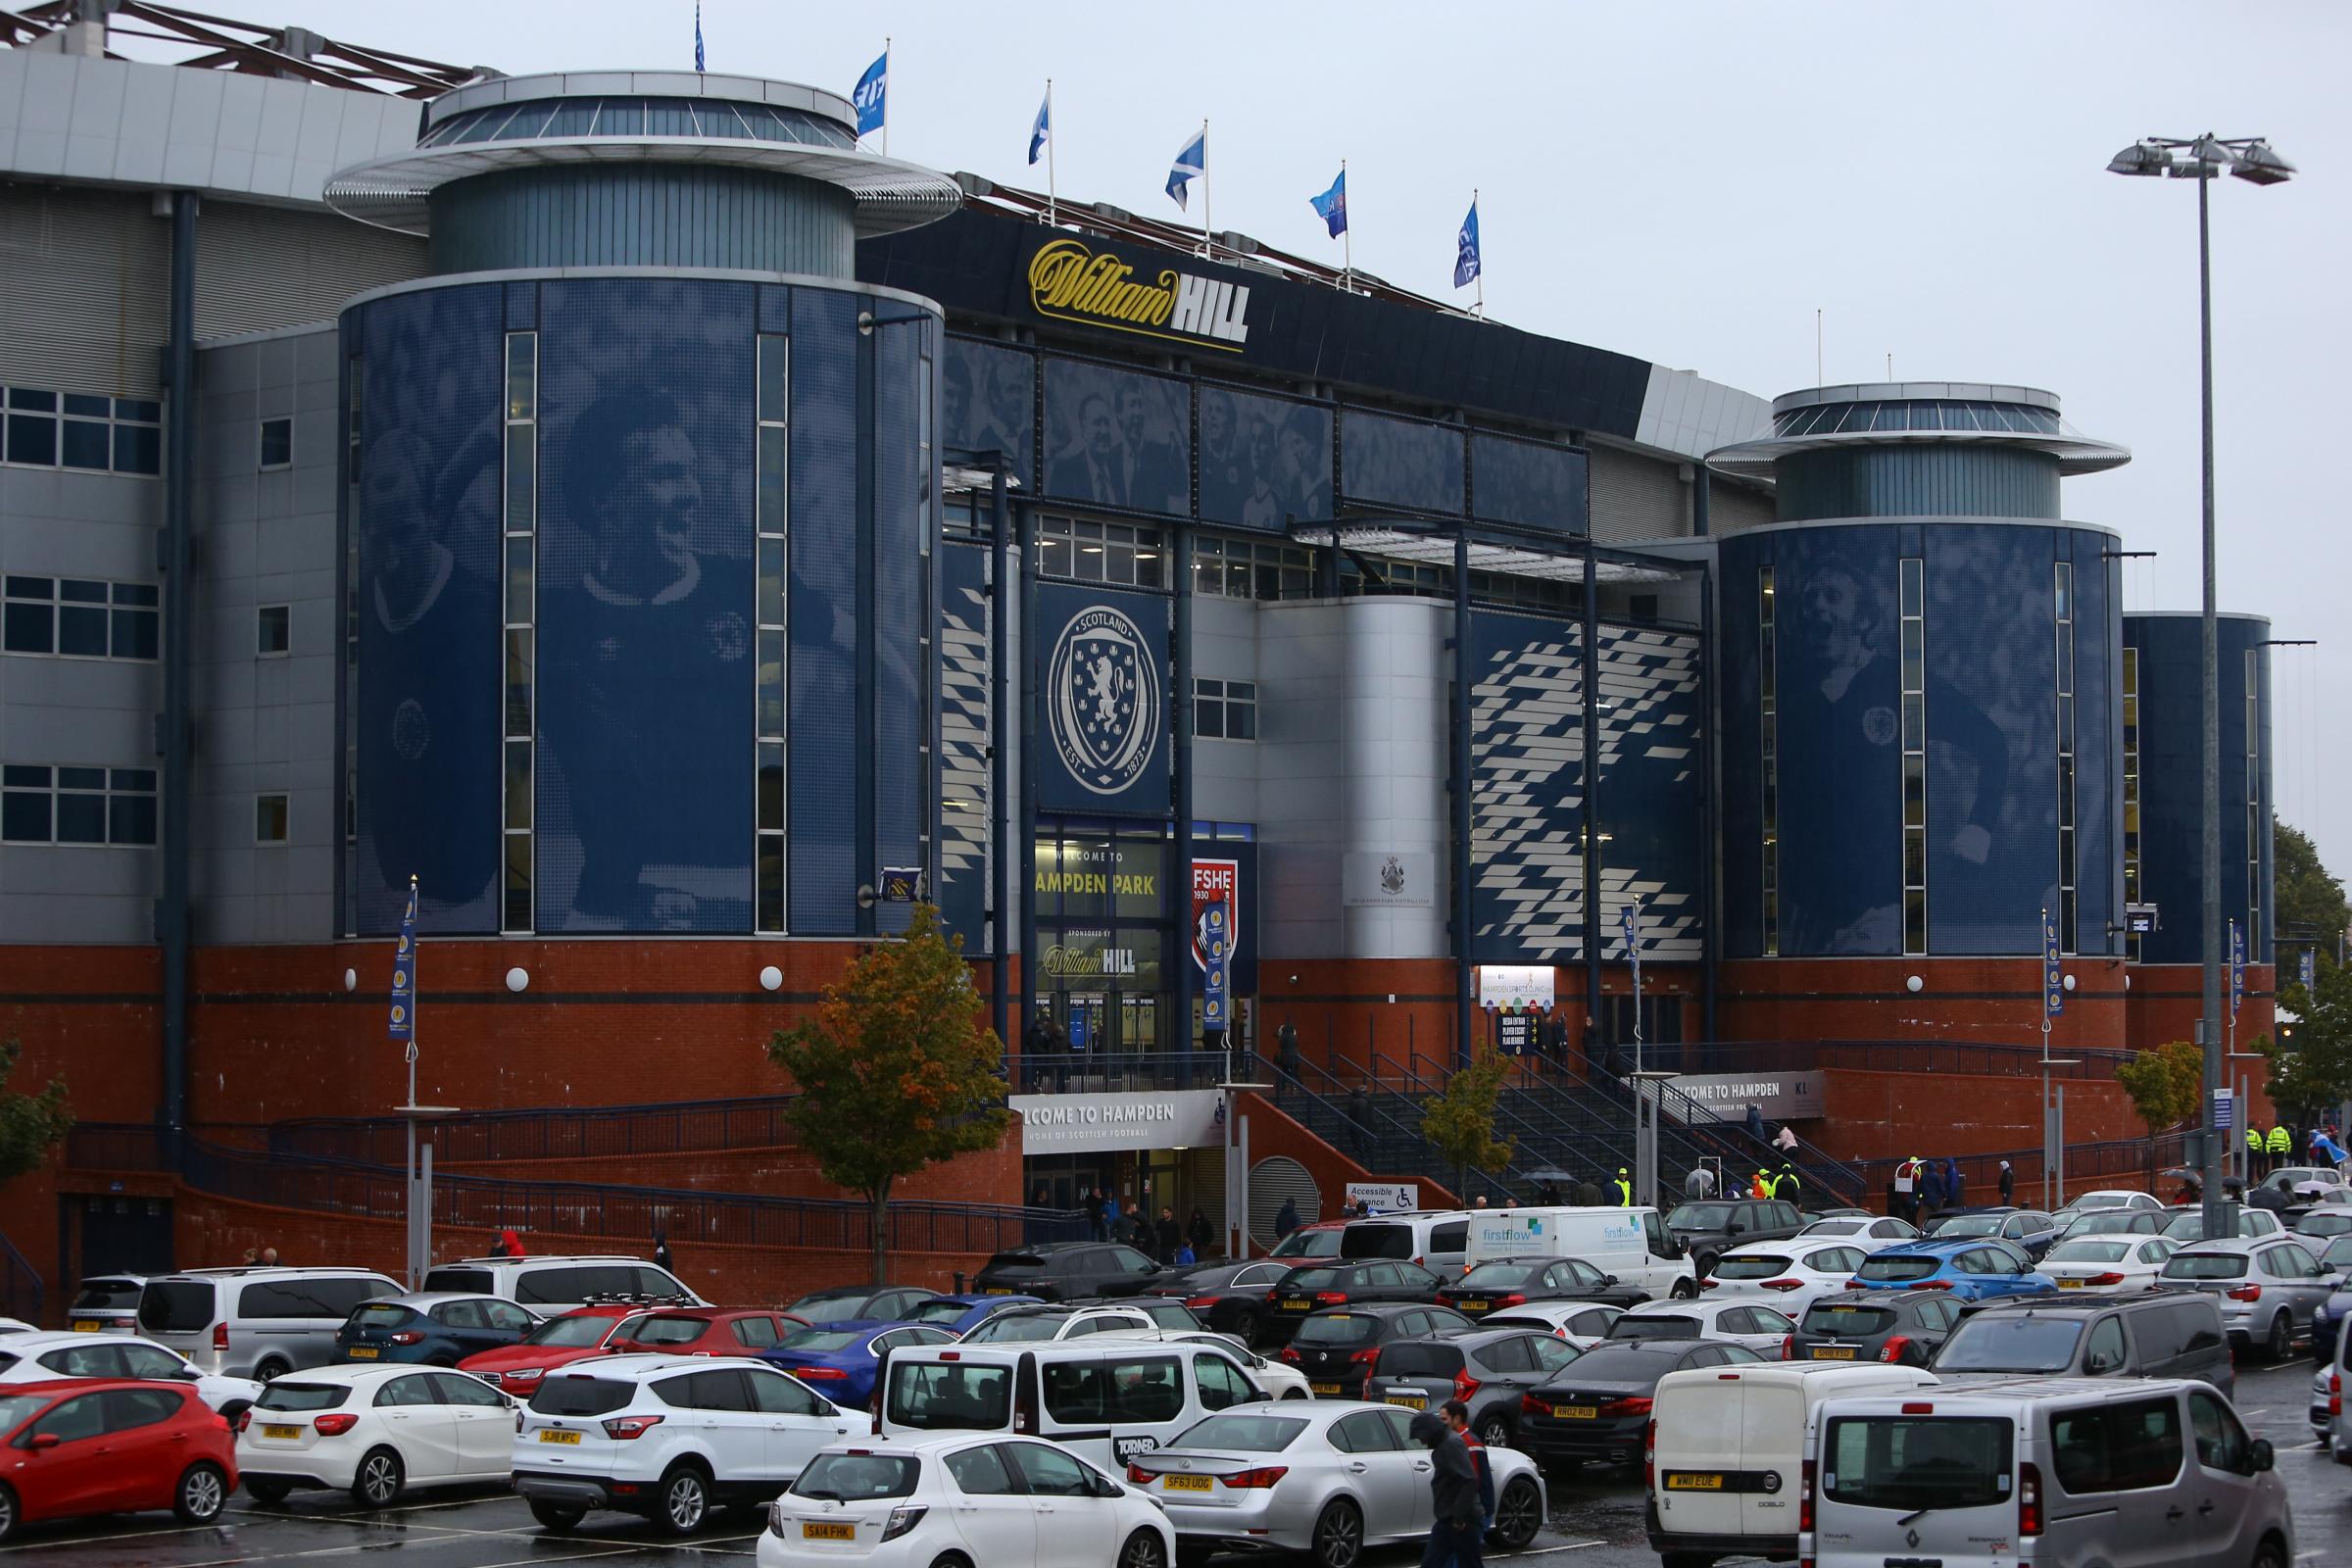 Scottish football clubs must issue 'unreserved apology' to victims of historic sexual abuse